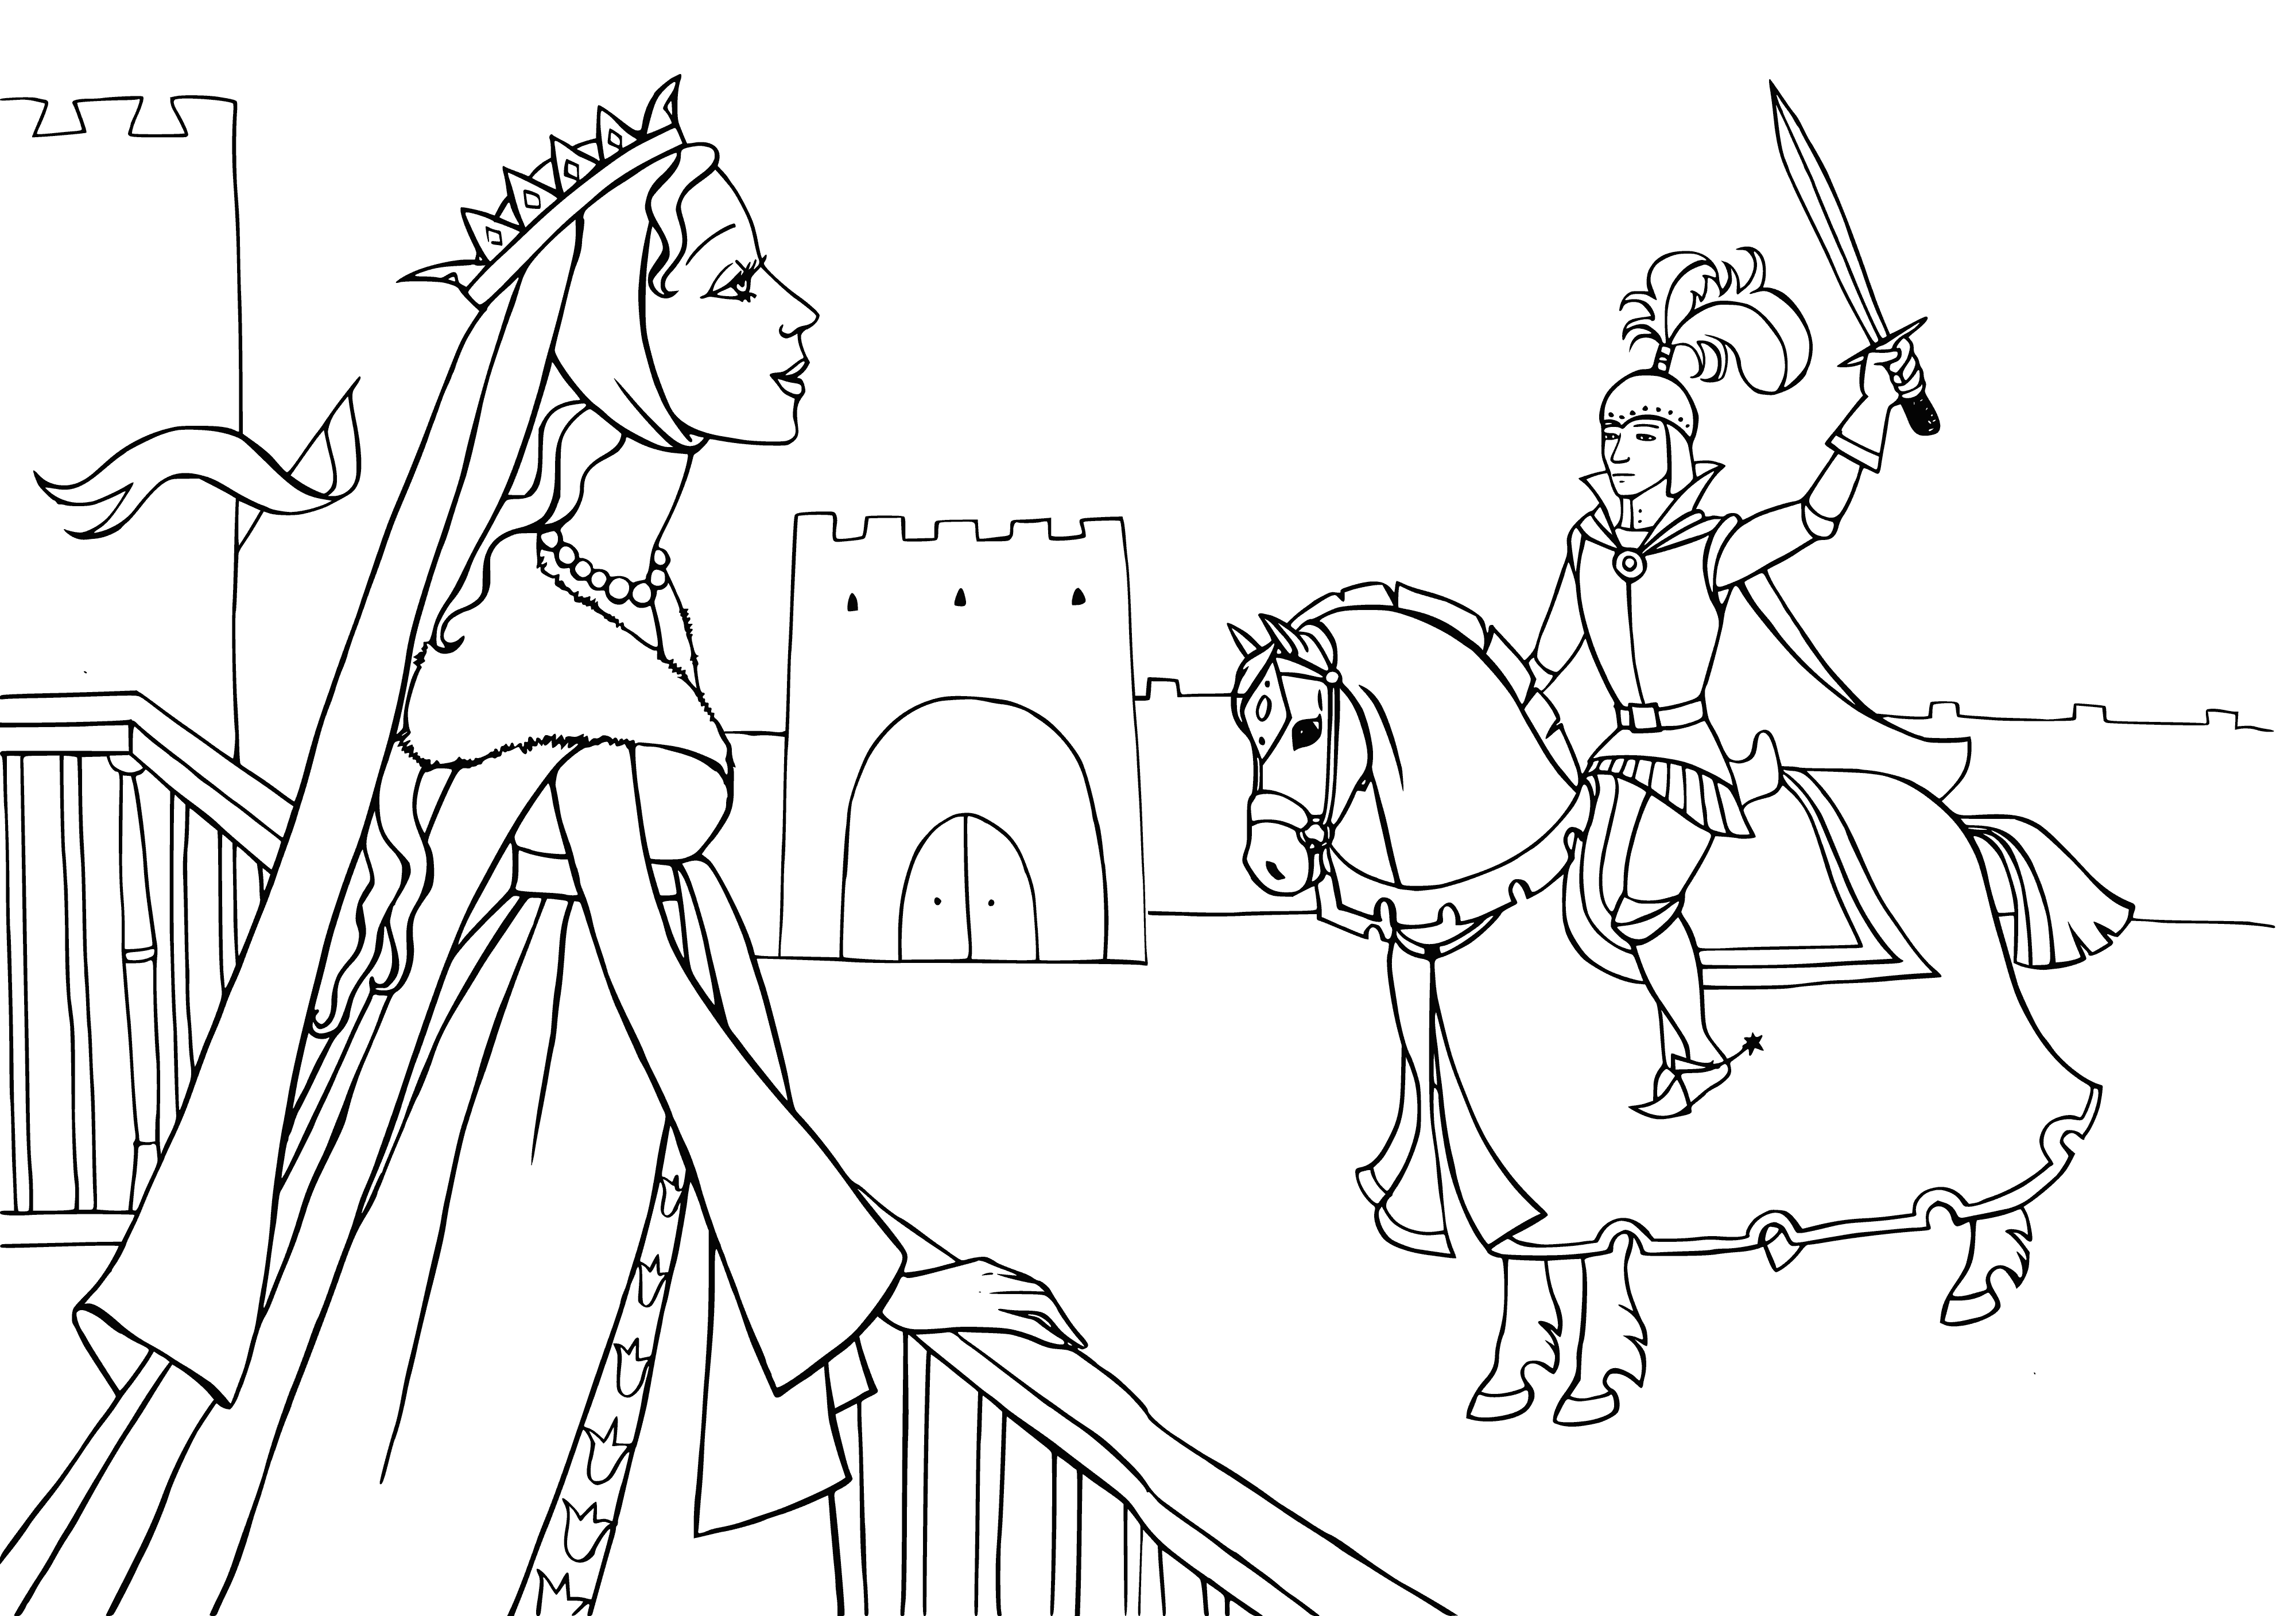 coloring page: Crowd cheers as two knights in white & black armor enter an arena and start a duel, with the first to draw blood declared the winner. The man in armor stands between them, ready to start the tournament. #Tournament #Duel #Knights